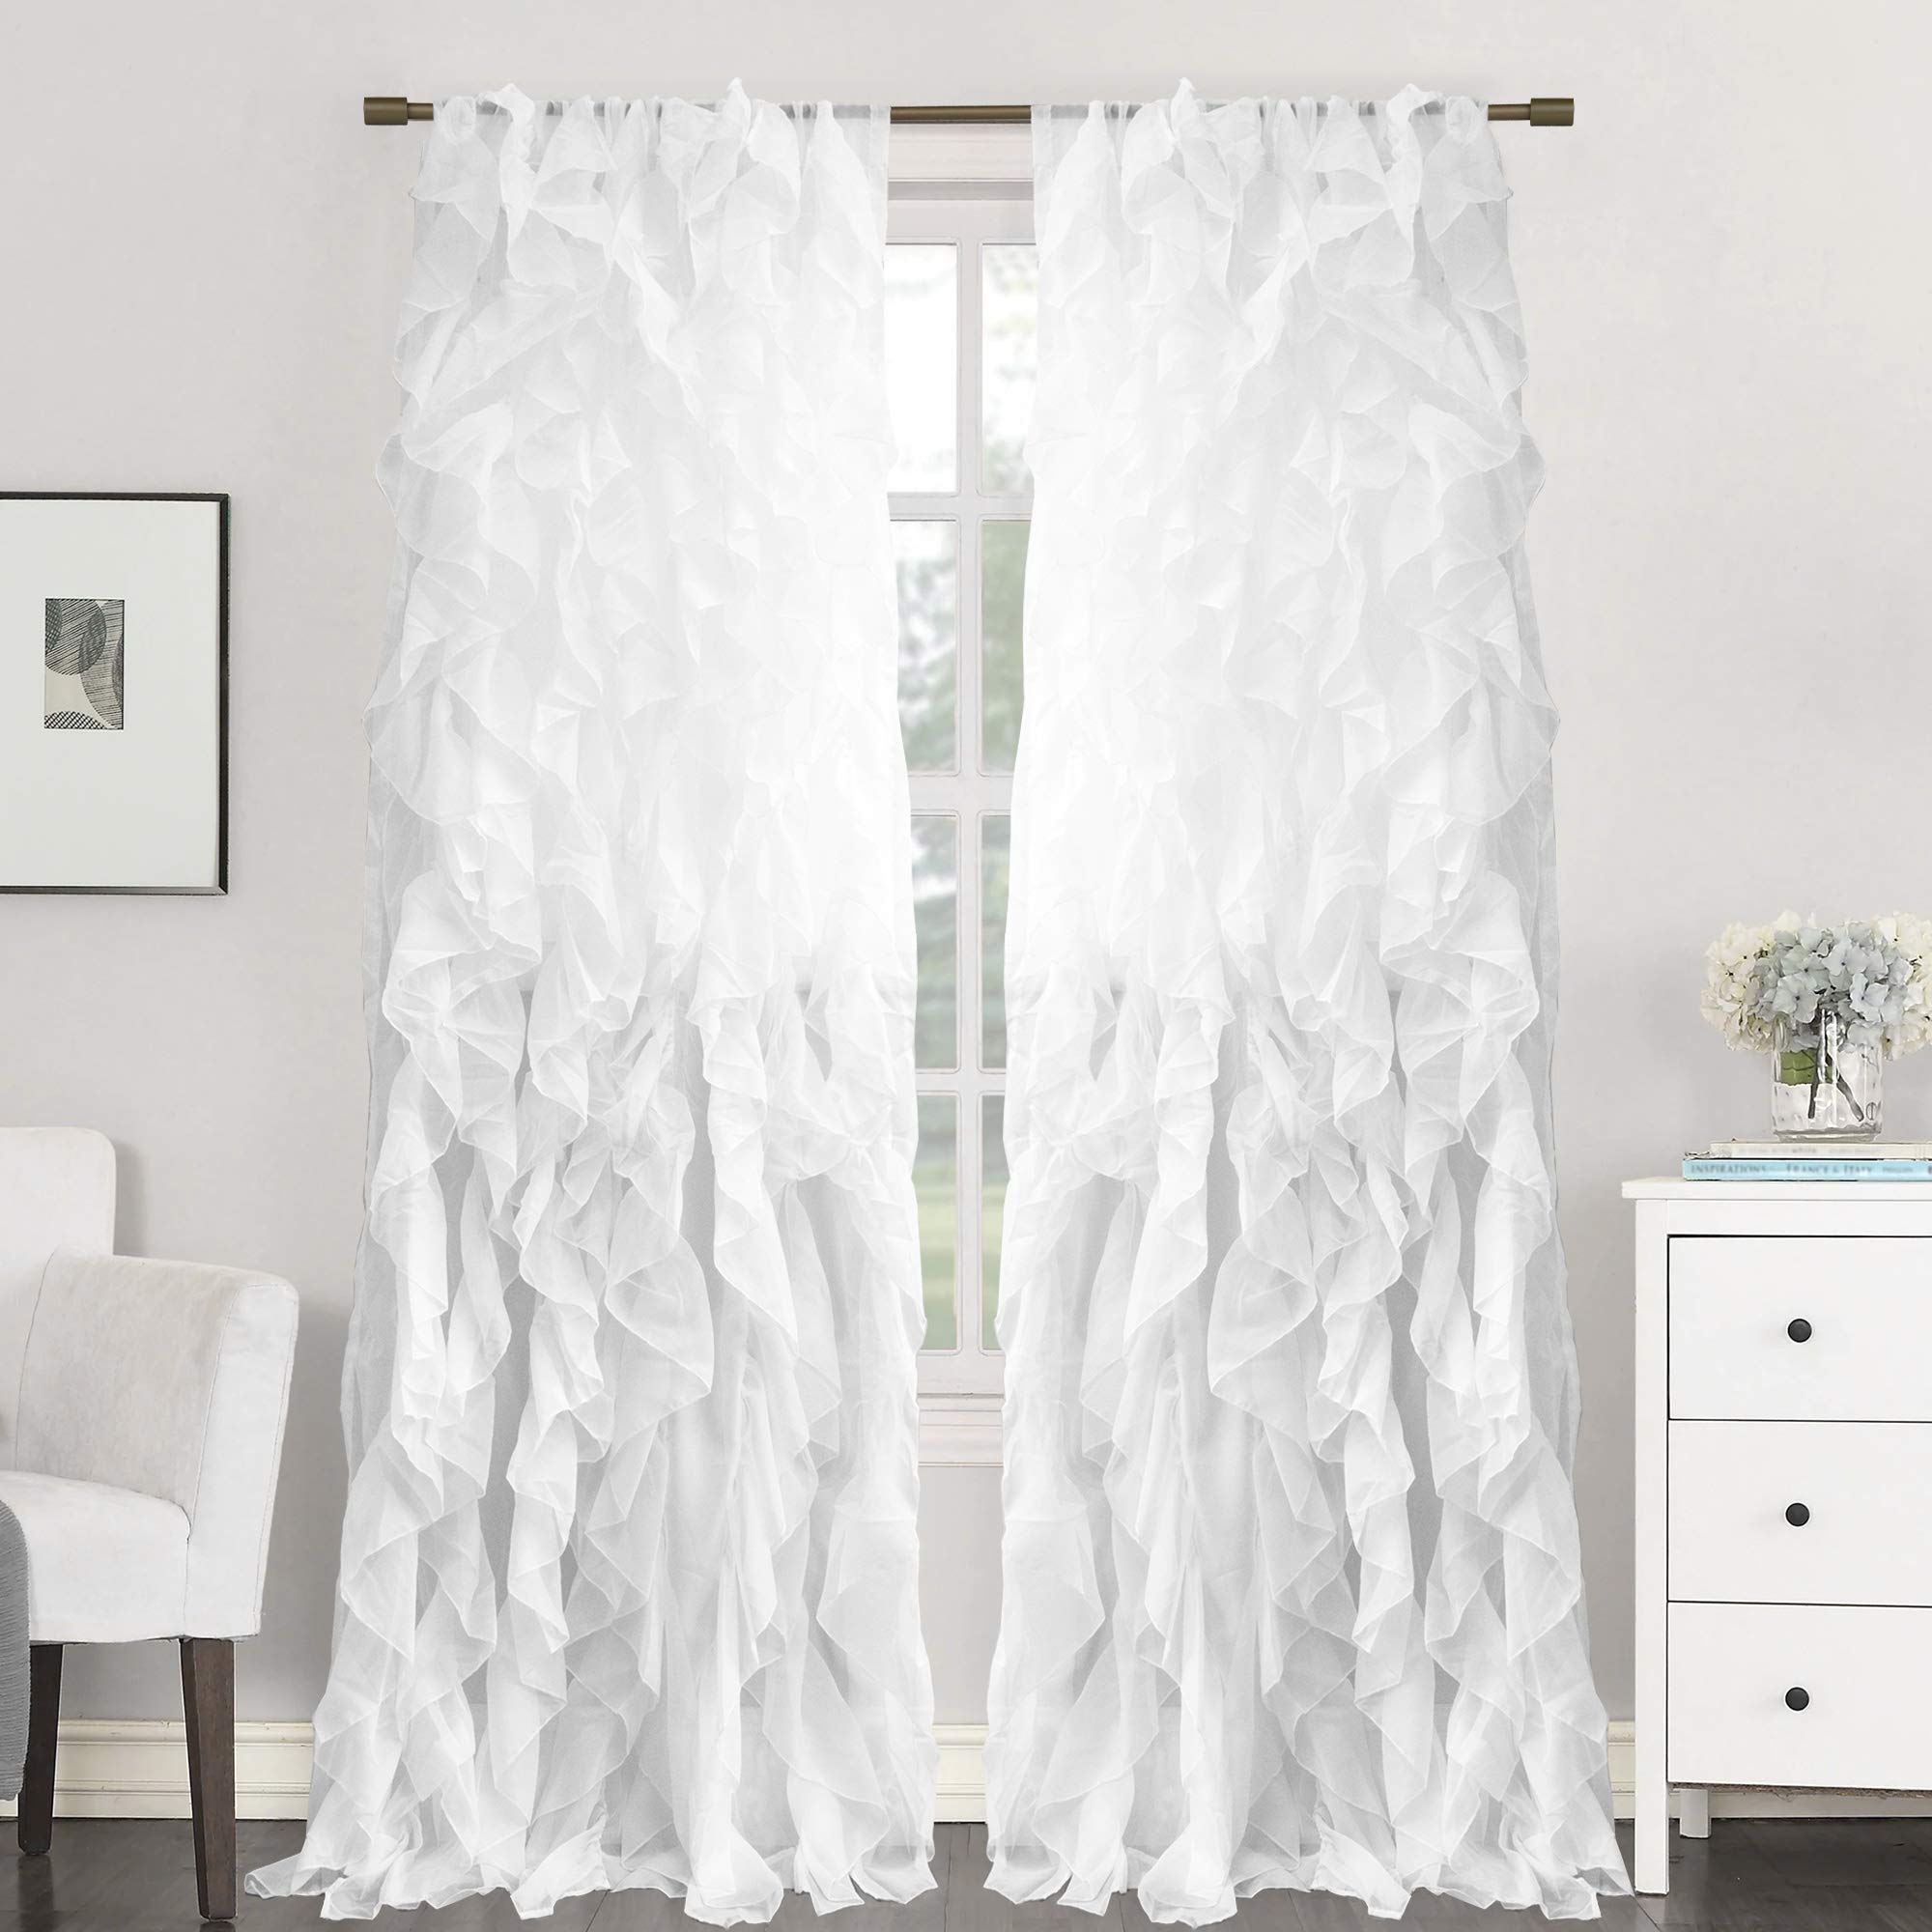 Sweet Home Collection Shrpnl-84-Wht-2Pk Sheer Voile Vertical Ruffled Window Curtain Panel 50" X 84", White, 84" X 50"